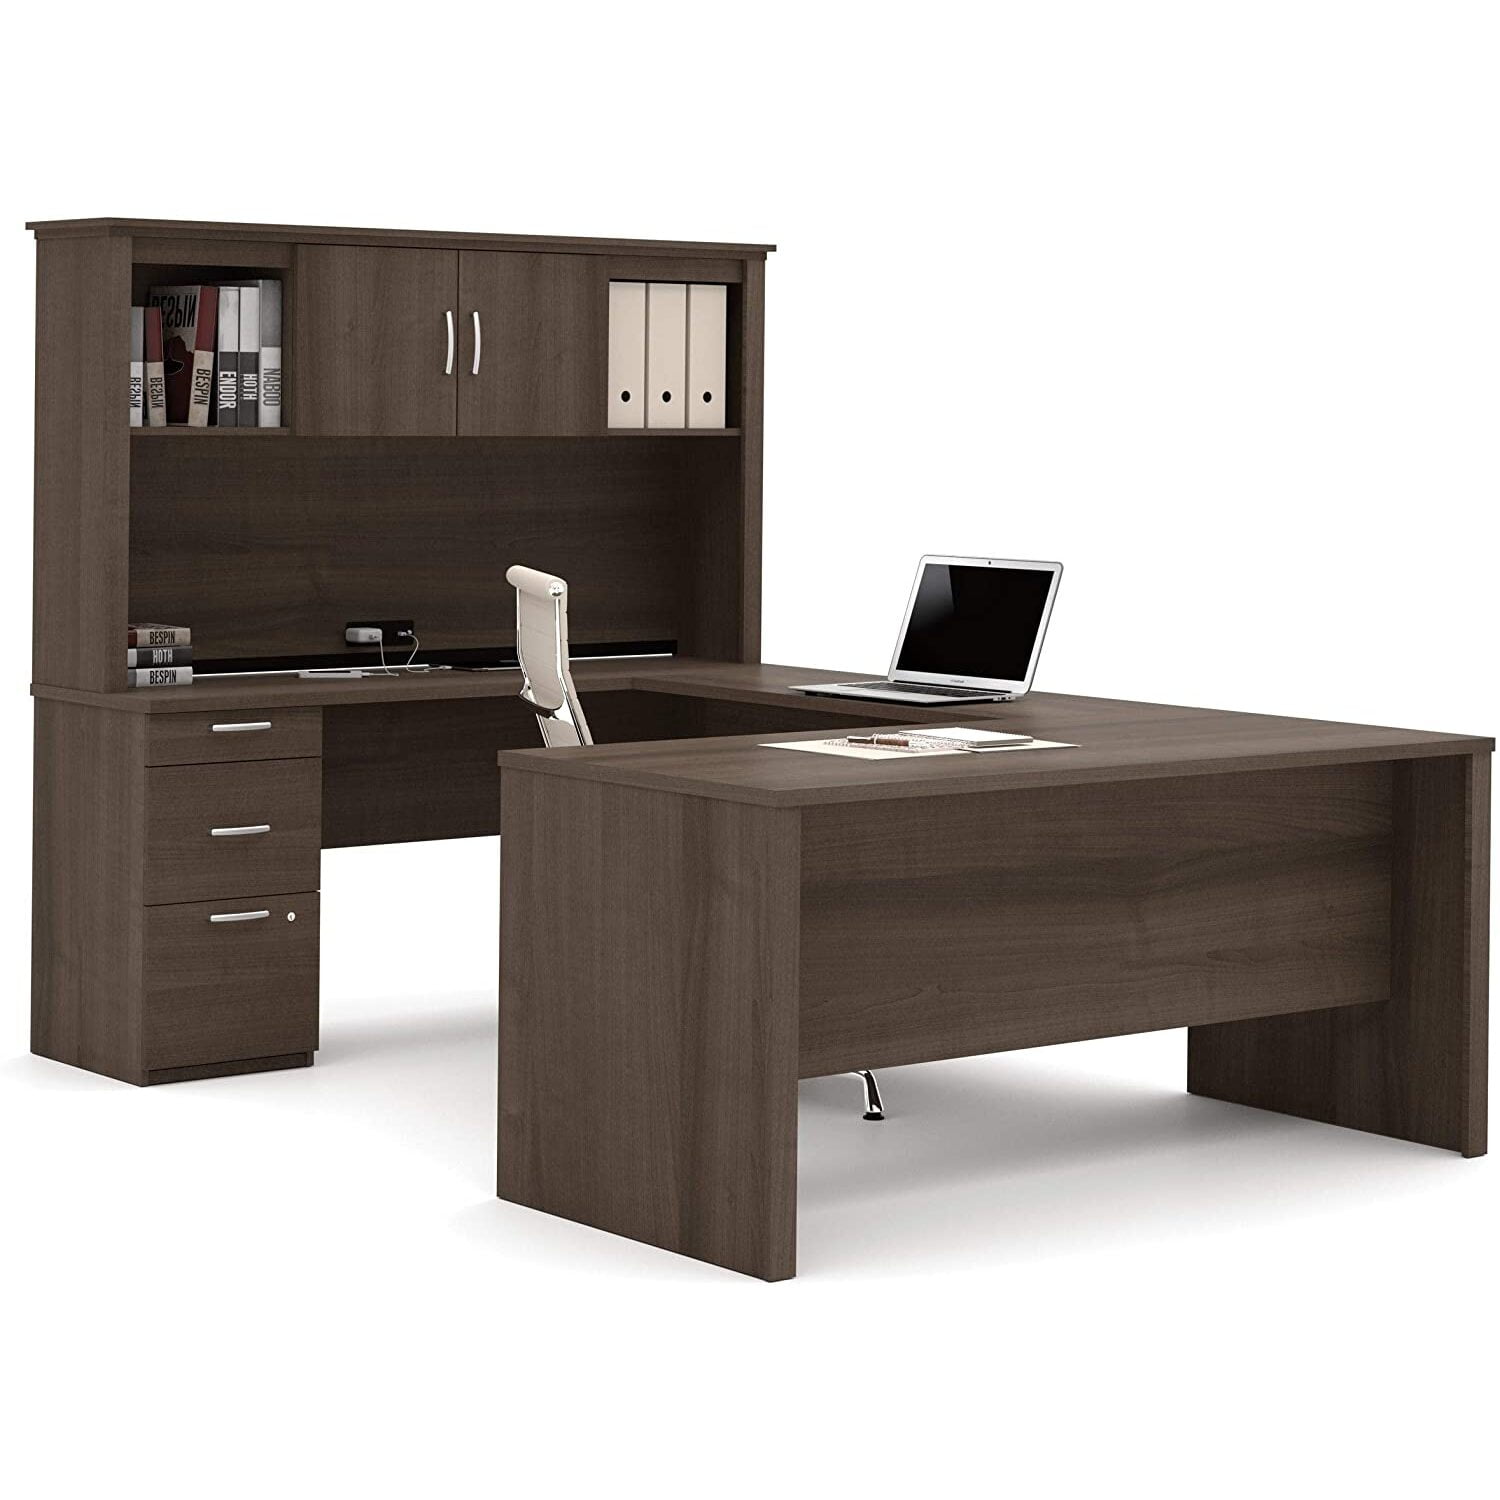 Bestar Logan 66 W U or L-Shaped Executive Office Desk with Pedestal and  Hutch in Antigua 